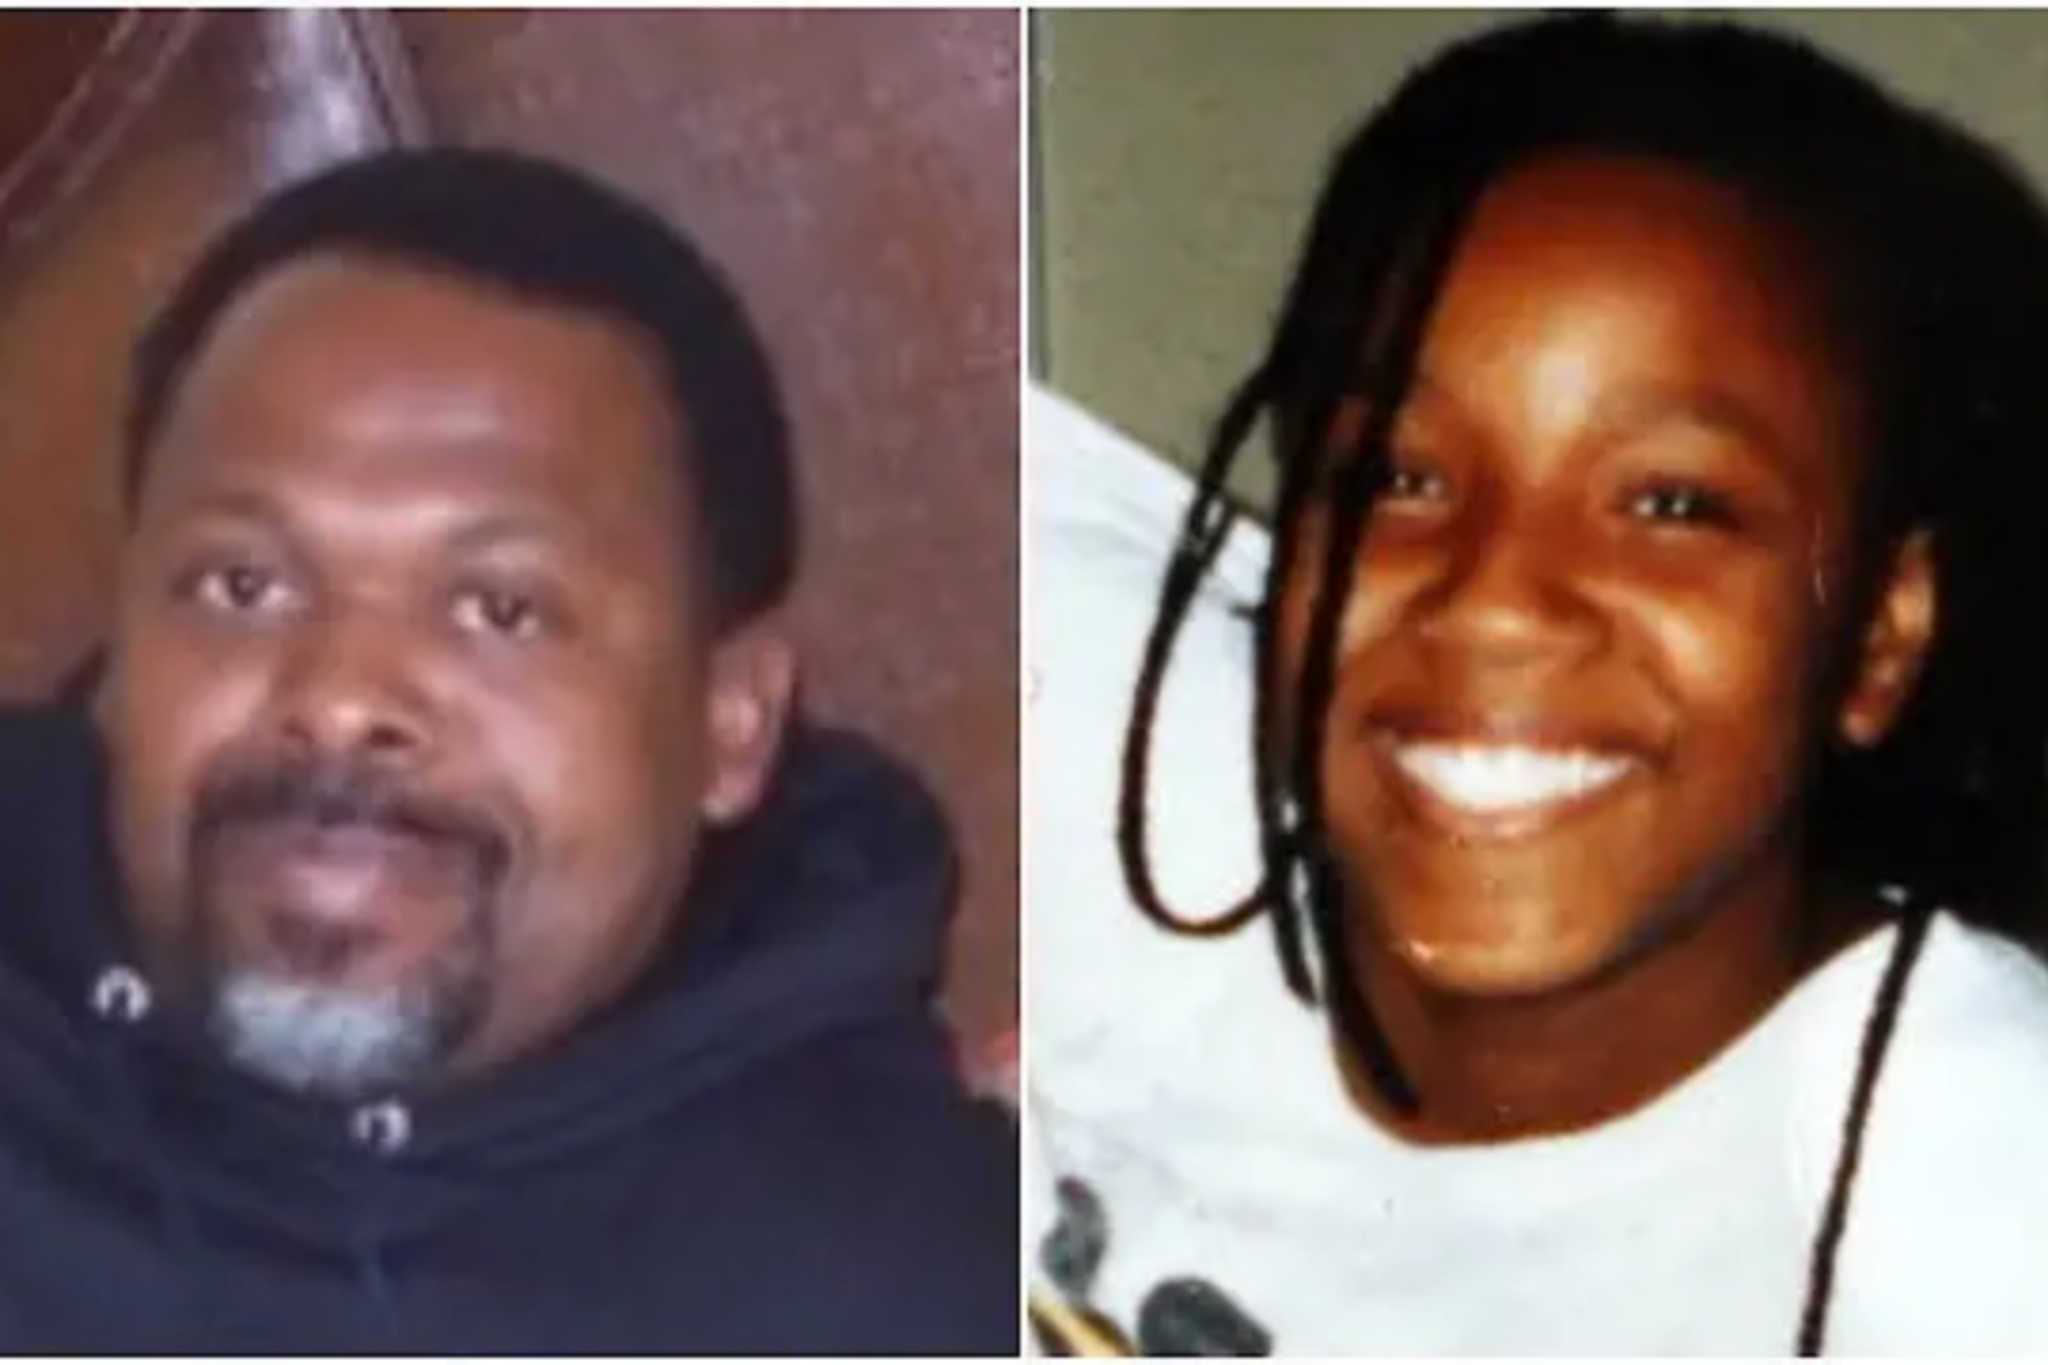 Unarmed couple killed by police Timothy Russell and 30 year old Malissa Williams